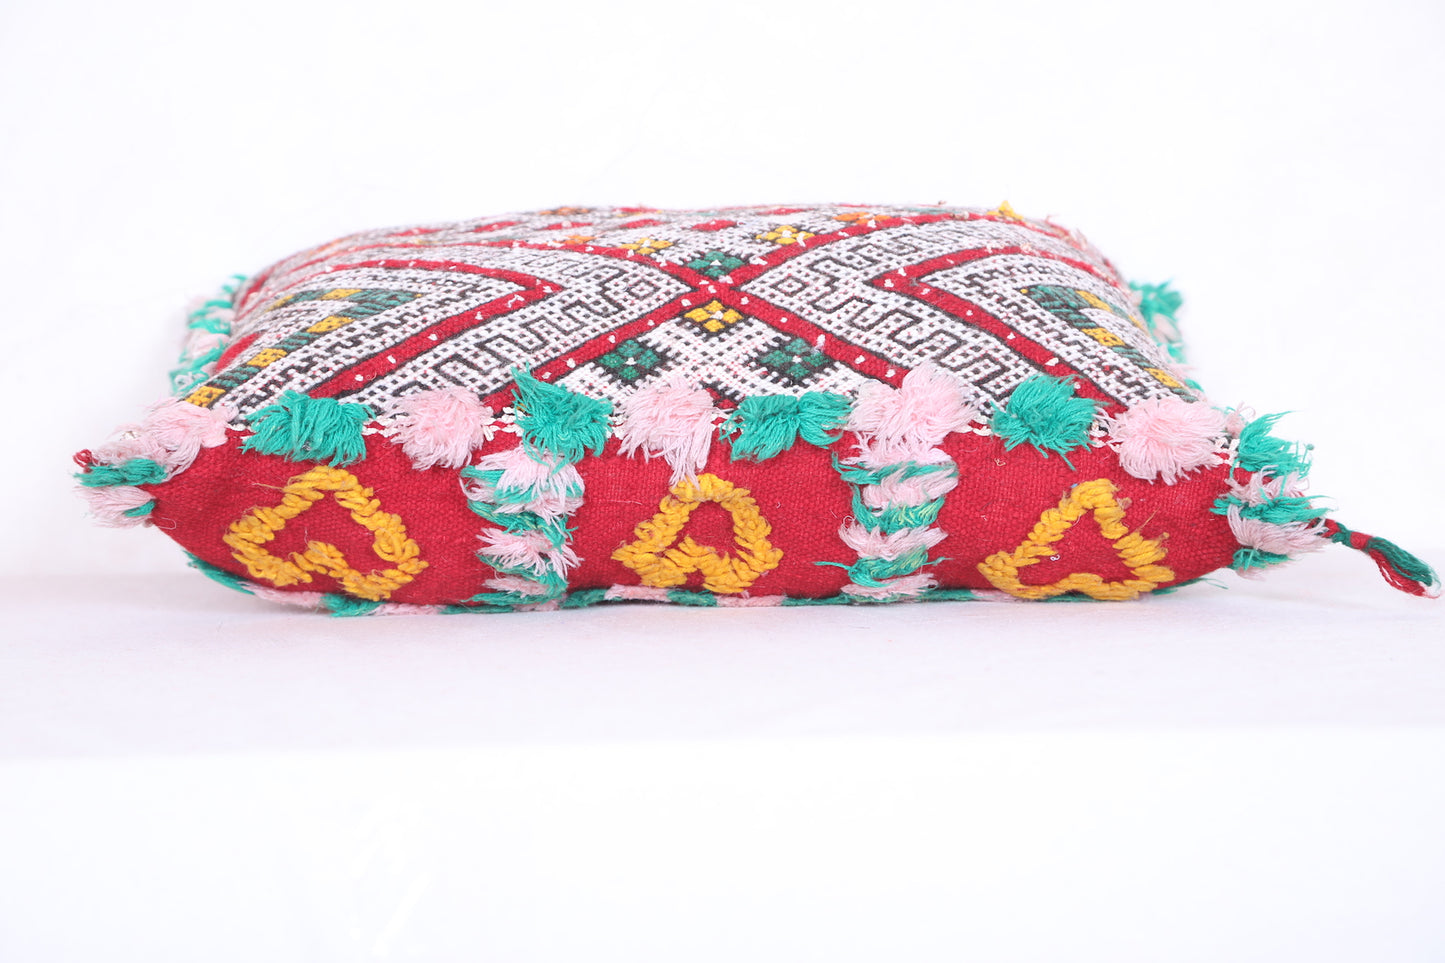 Moroccan handmade kilim pillow  13.7 INCHES X 18.5 INCHES